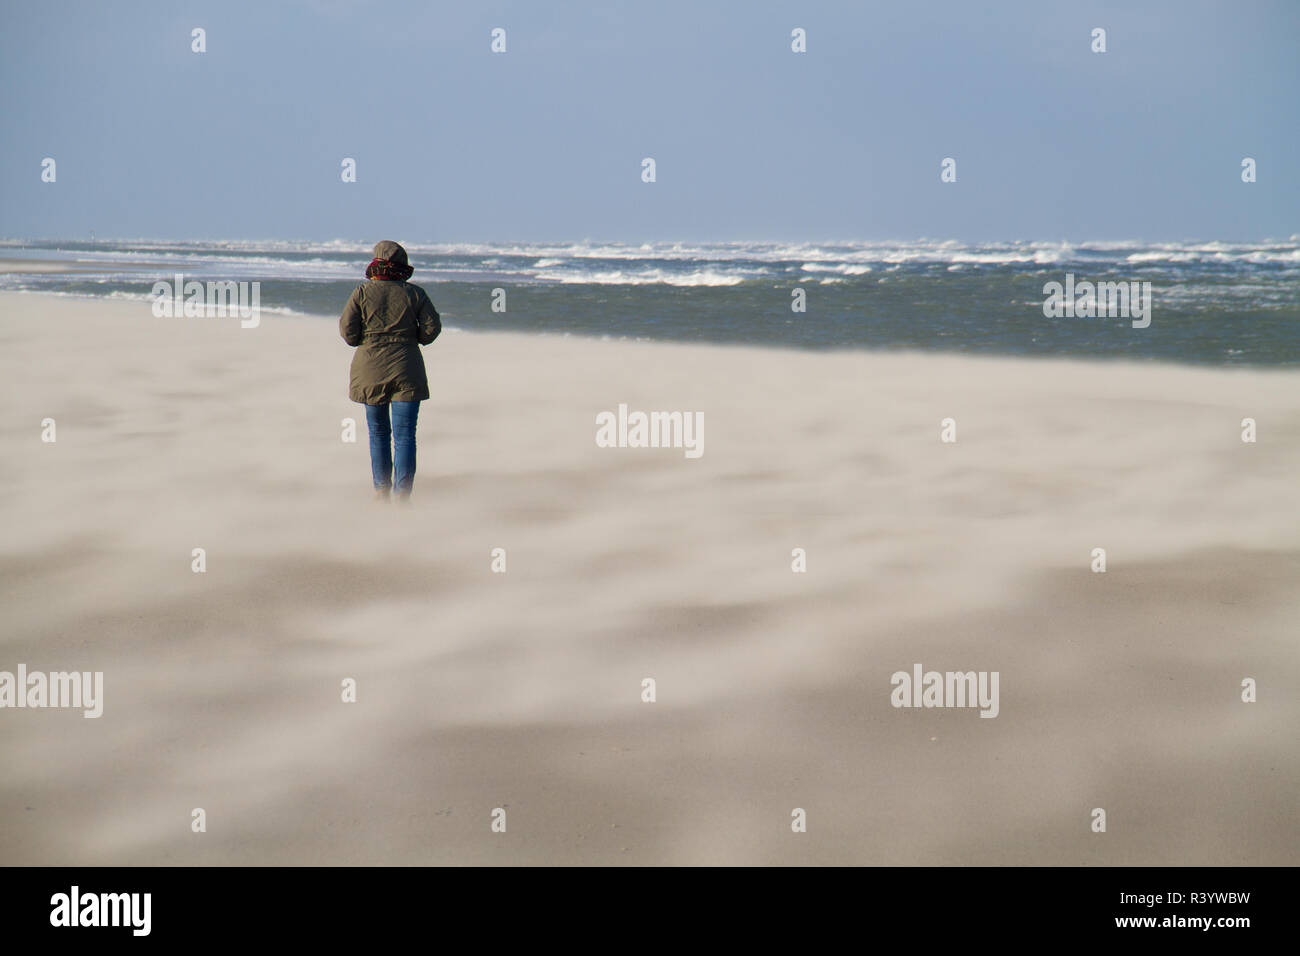 Woman walking on beach on a stormy day in winter, sand blowing over the beach Stock Photo